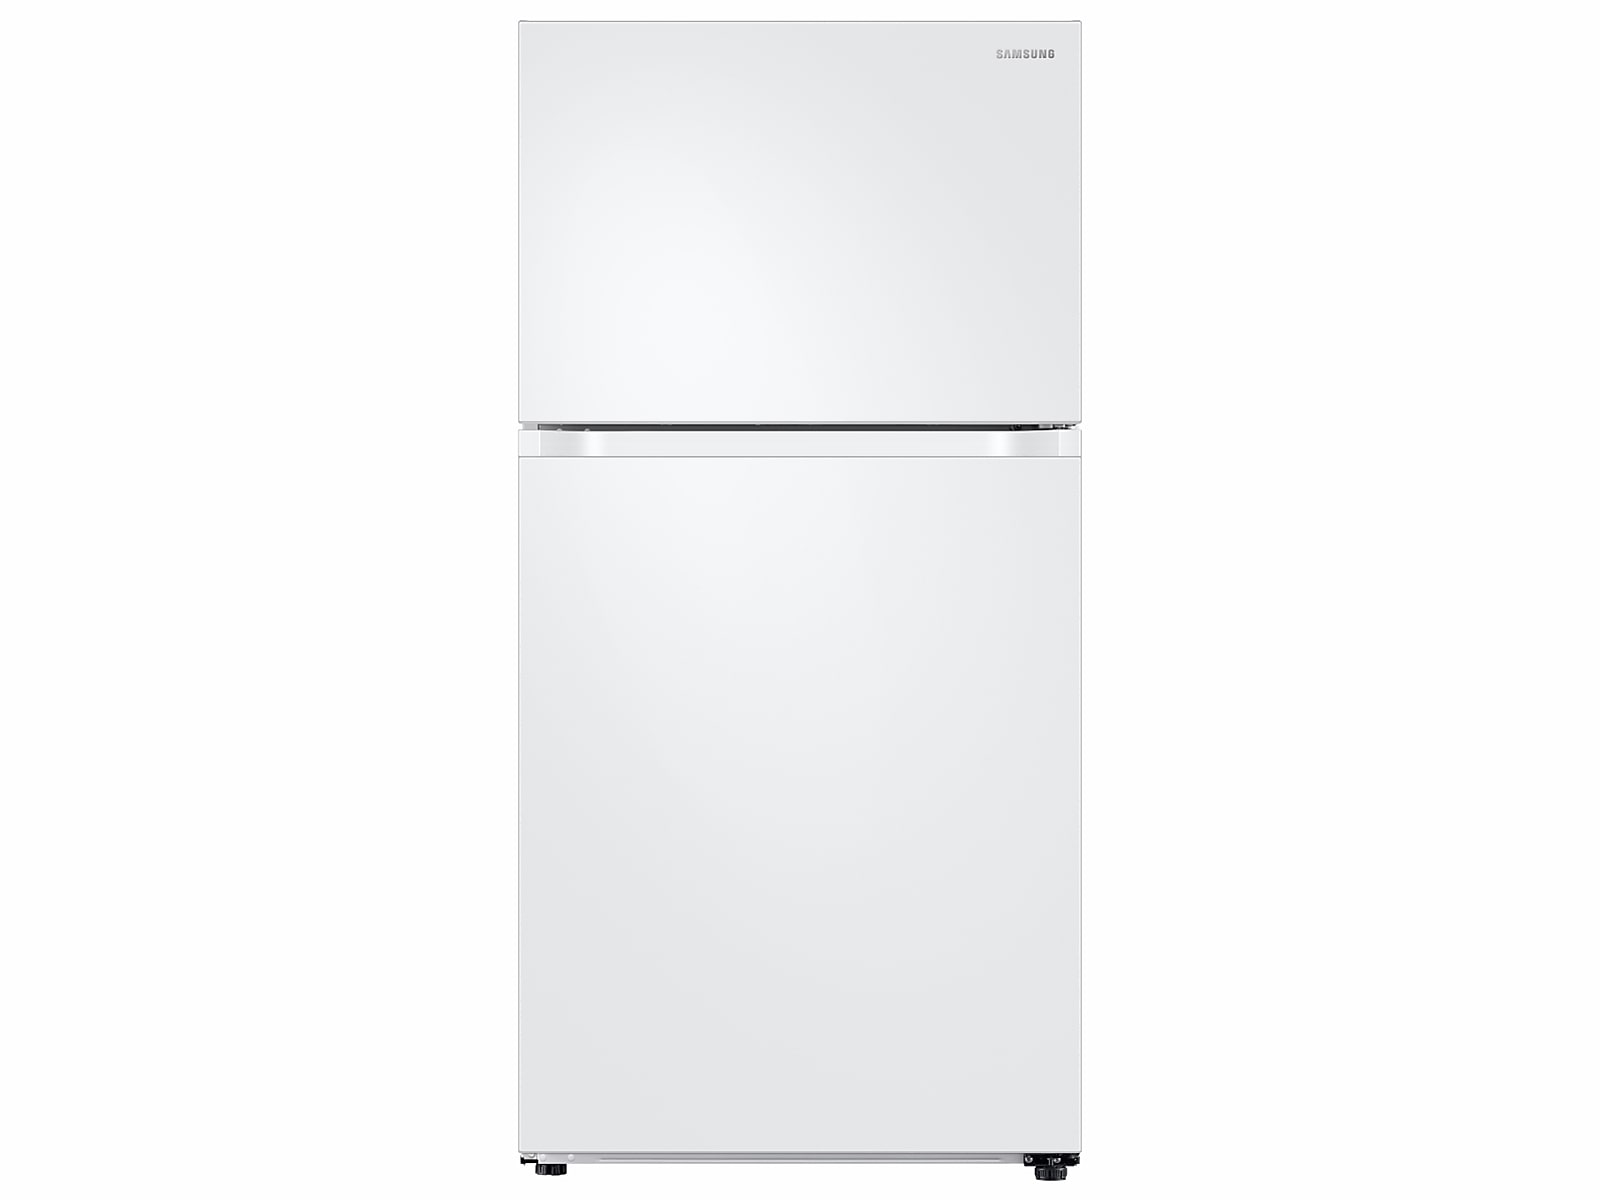 Samsung 21 cu. ft. Top Freezer Refrigerator with FlexZone™ and Ice Maker in White(RT21M6215WW/AA)